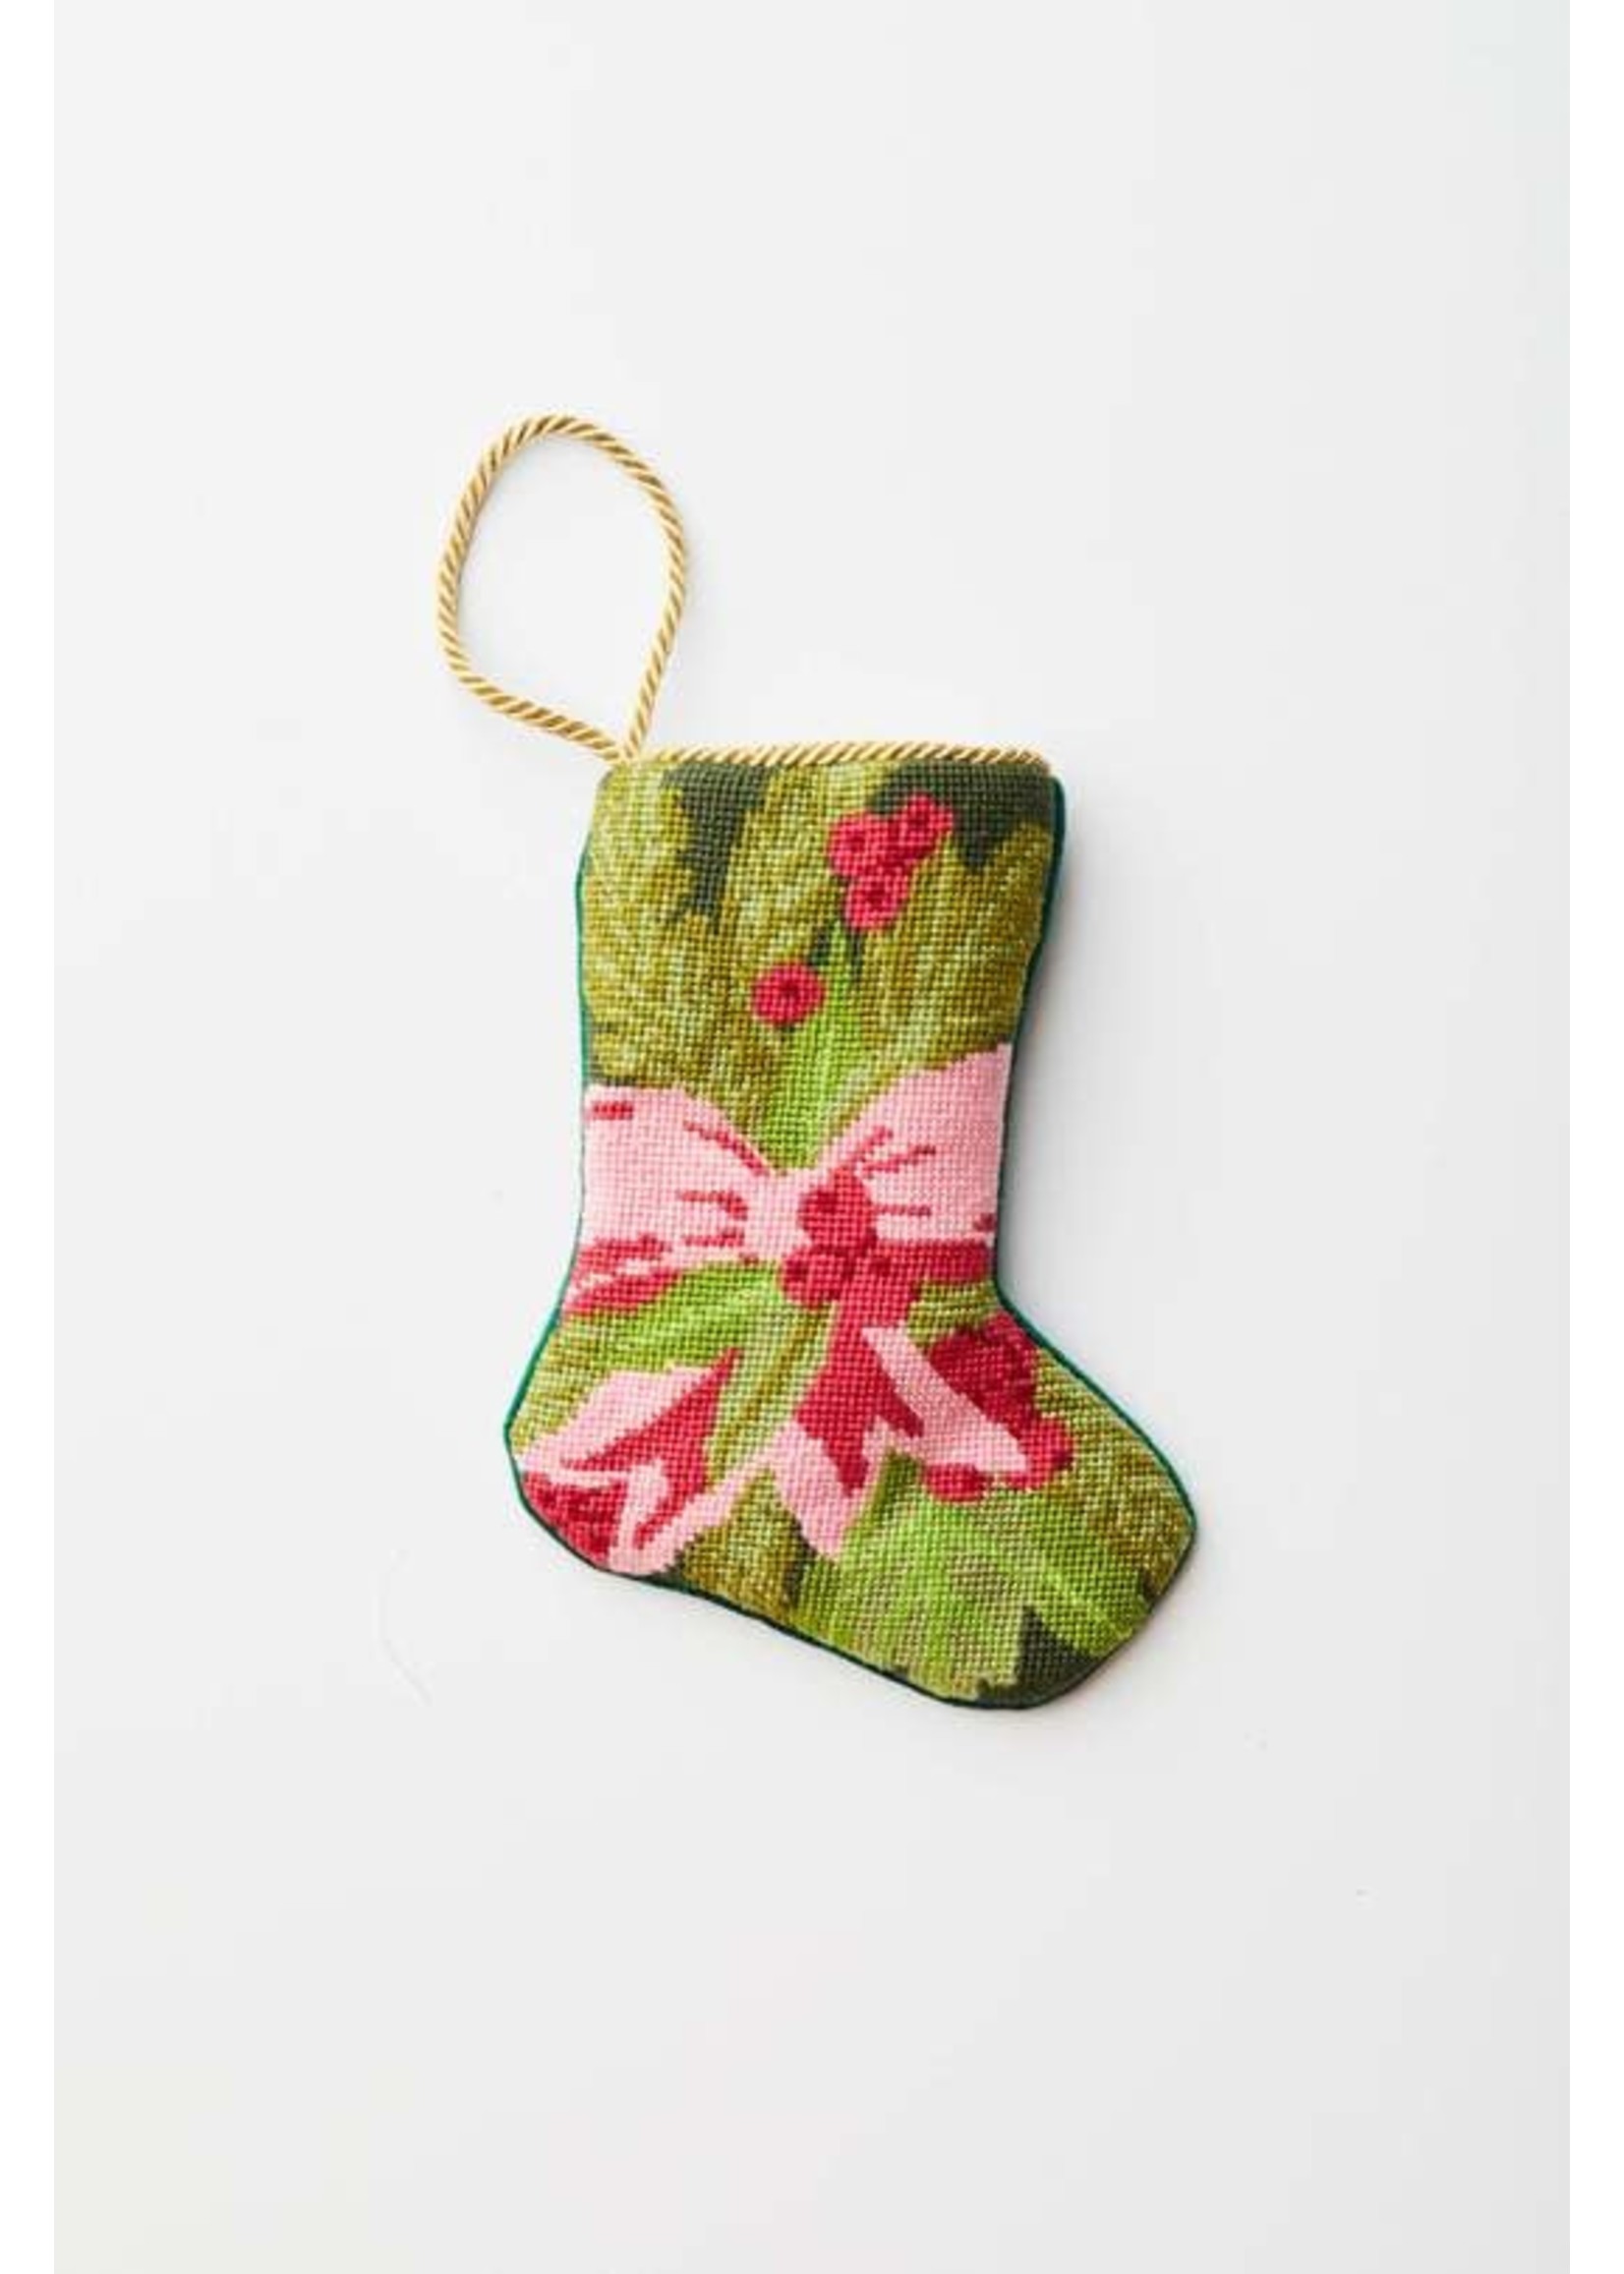 Bauble Stockings Bauble Stocking Holiday Greetings